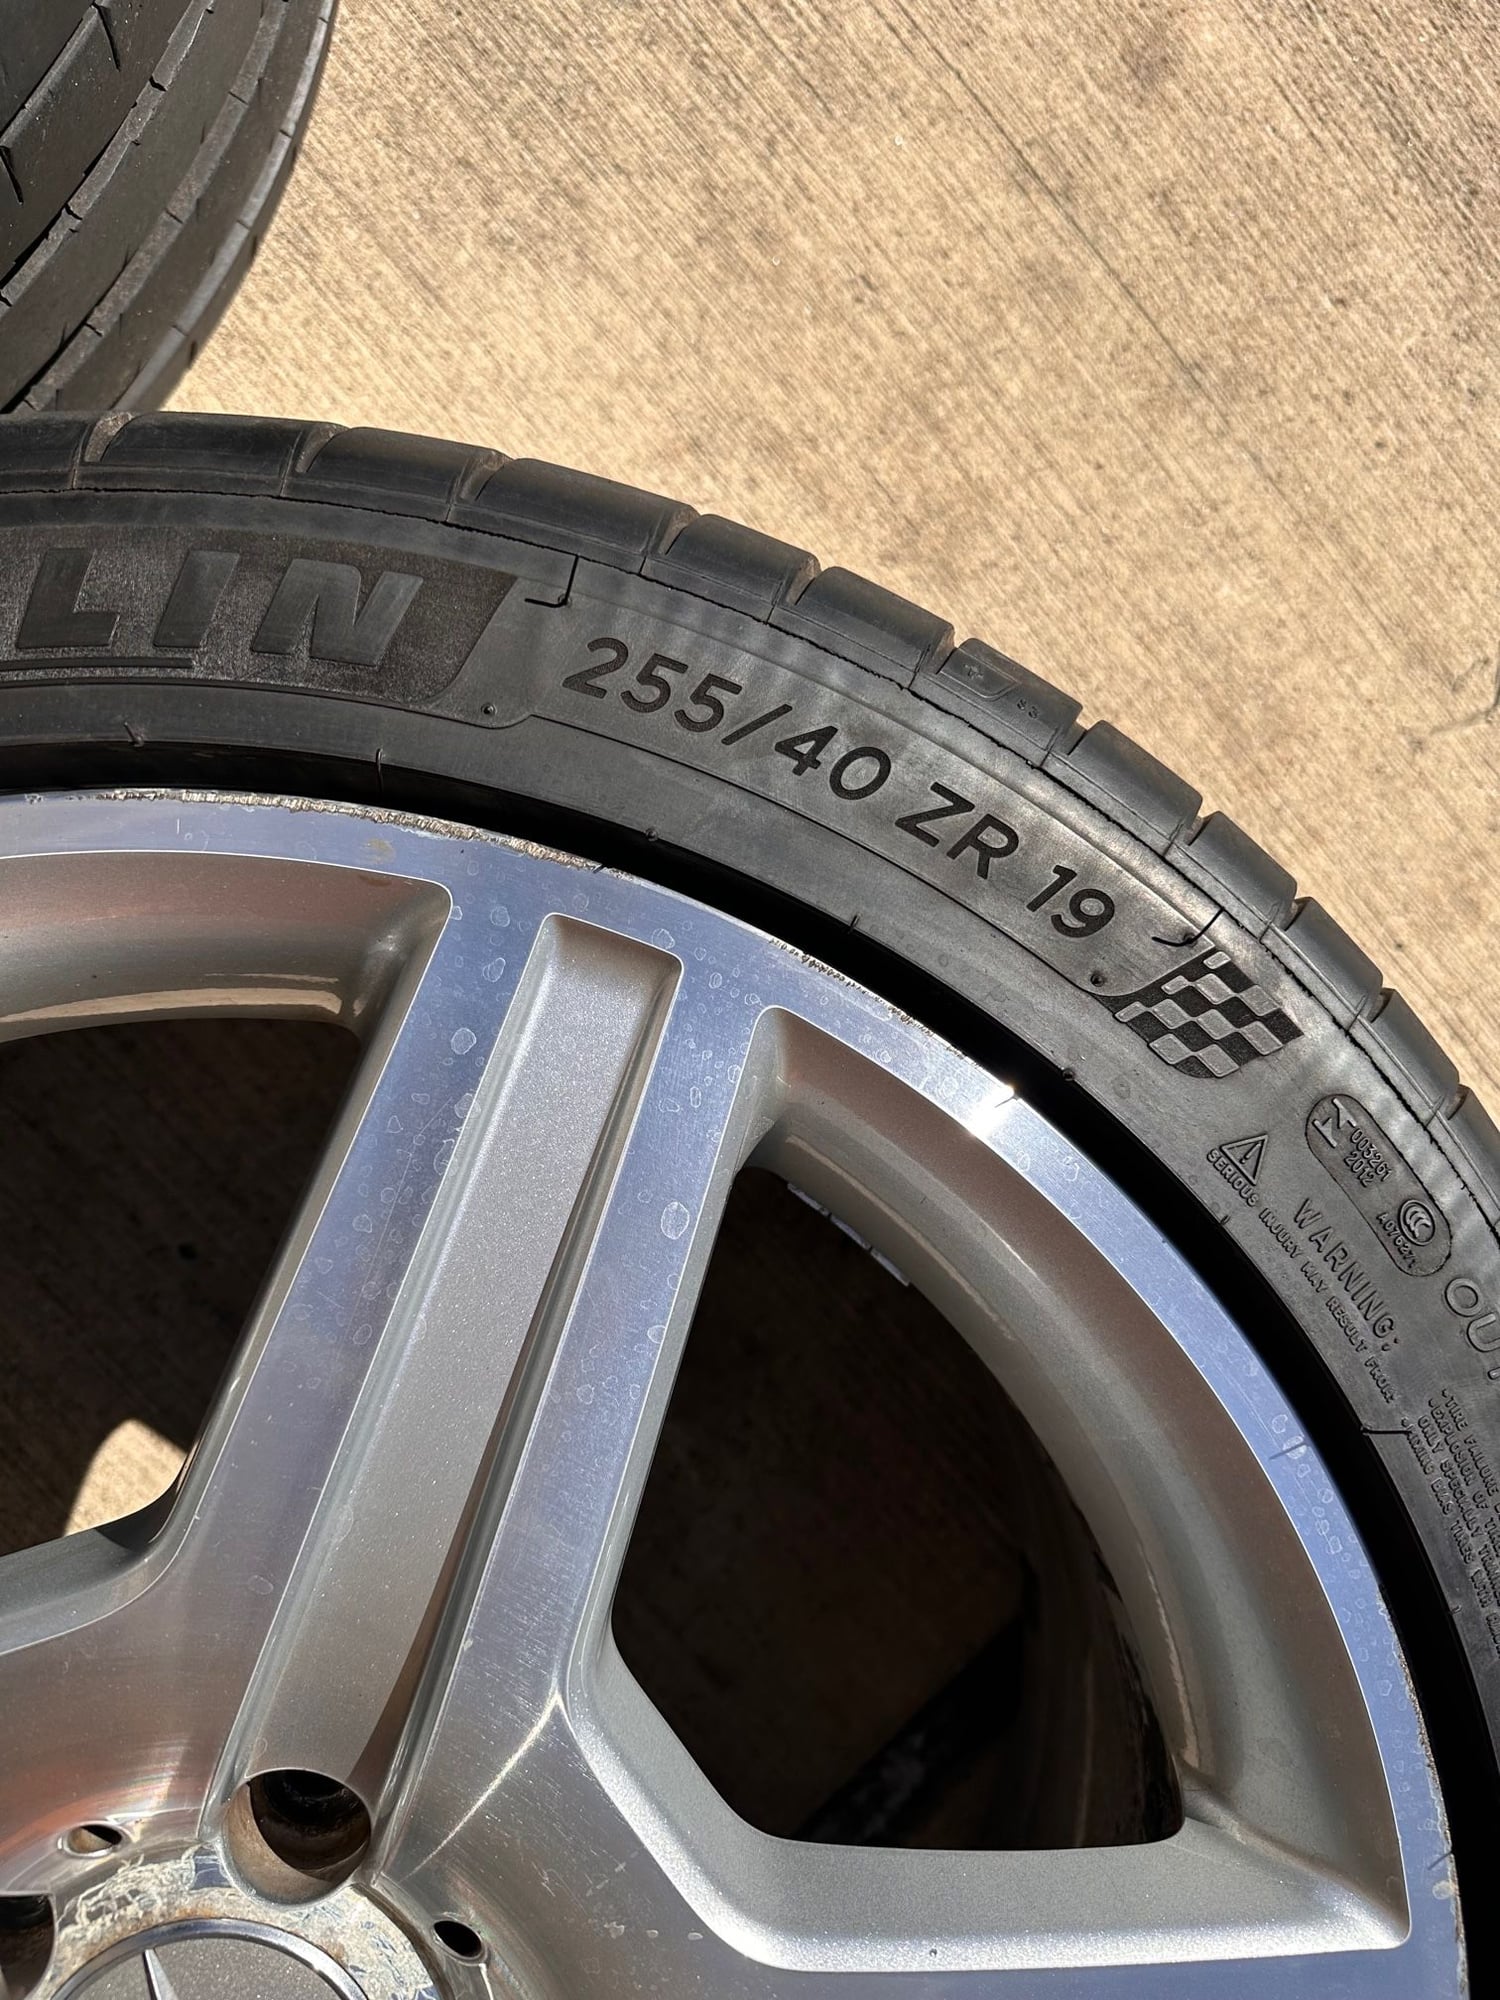 Wheels and Tires/Axles - Mercedes s550 19” OEM AMG sport wheels (staggered) with Michelin Pilot Sport 4S - Used - 2009 Mercedes-Benz S550 - Houston, TX 77024, United States